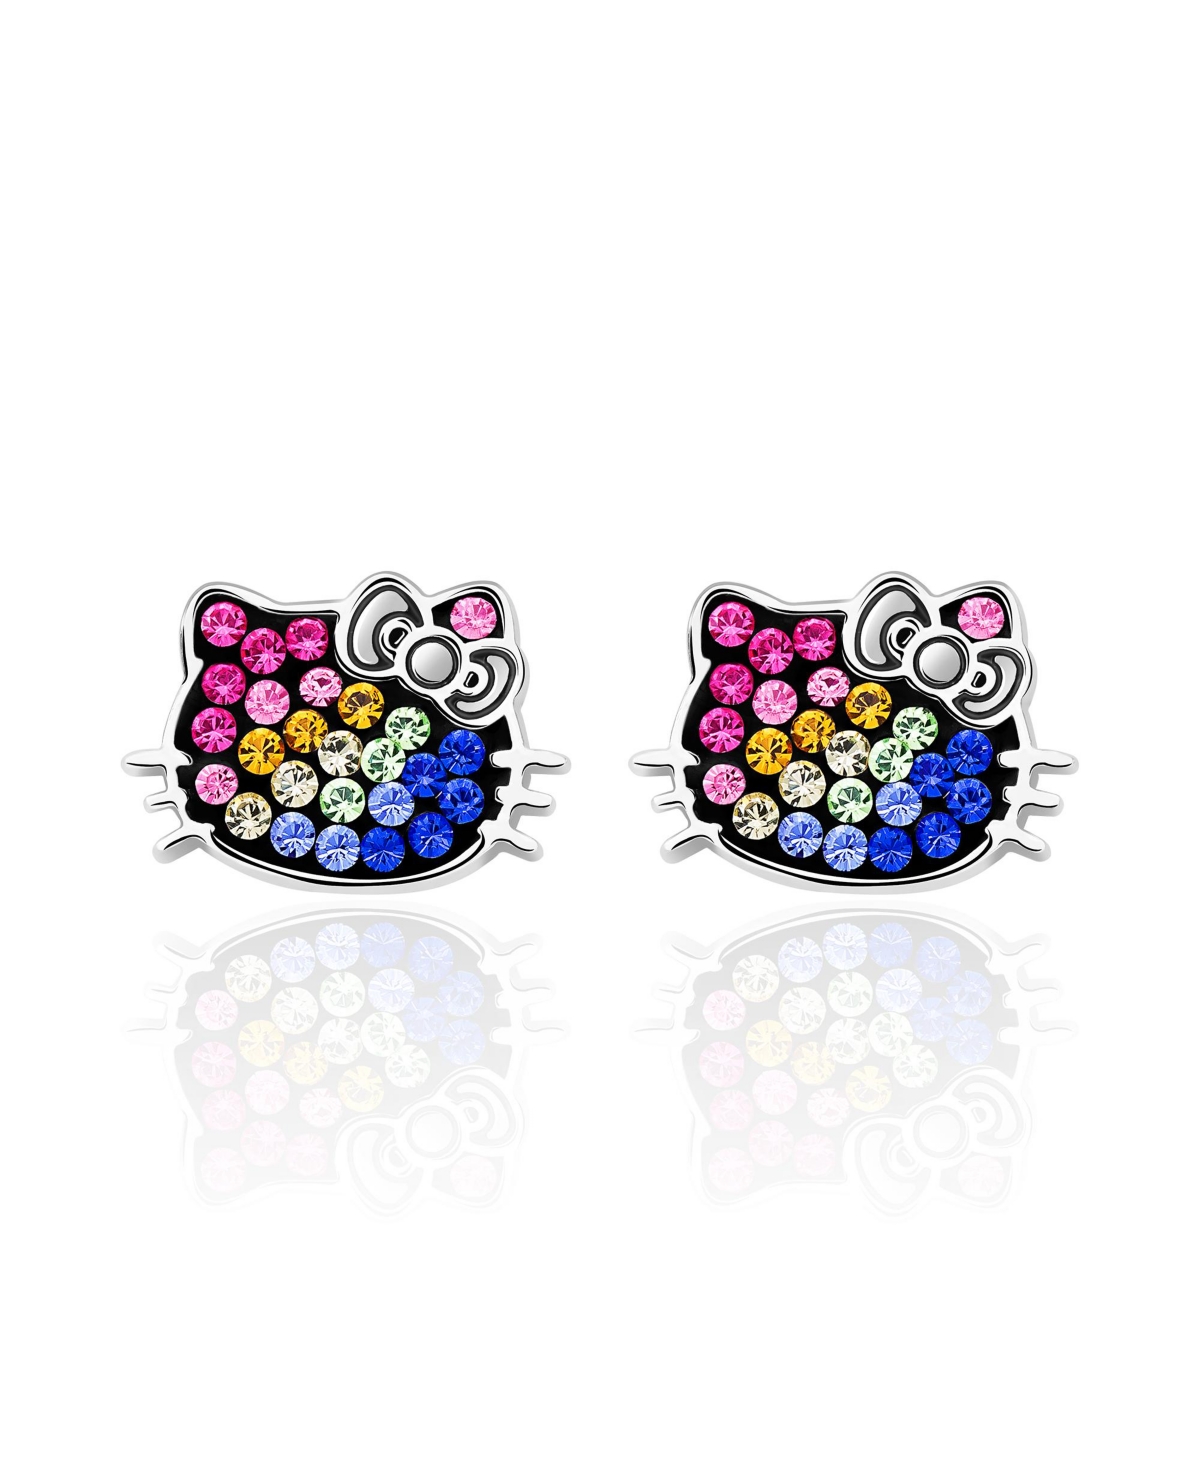 Sanrio Hello Kitty Rainbow Crystal Stud Earrings, officially licensed - Silver tone, pink, orange, green